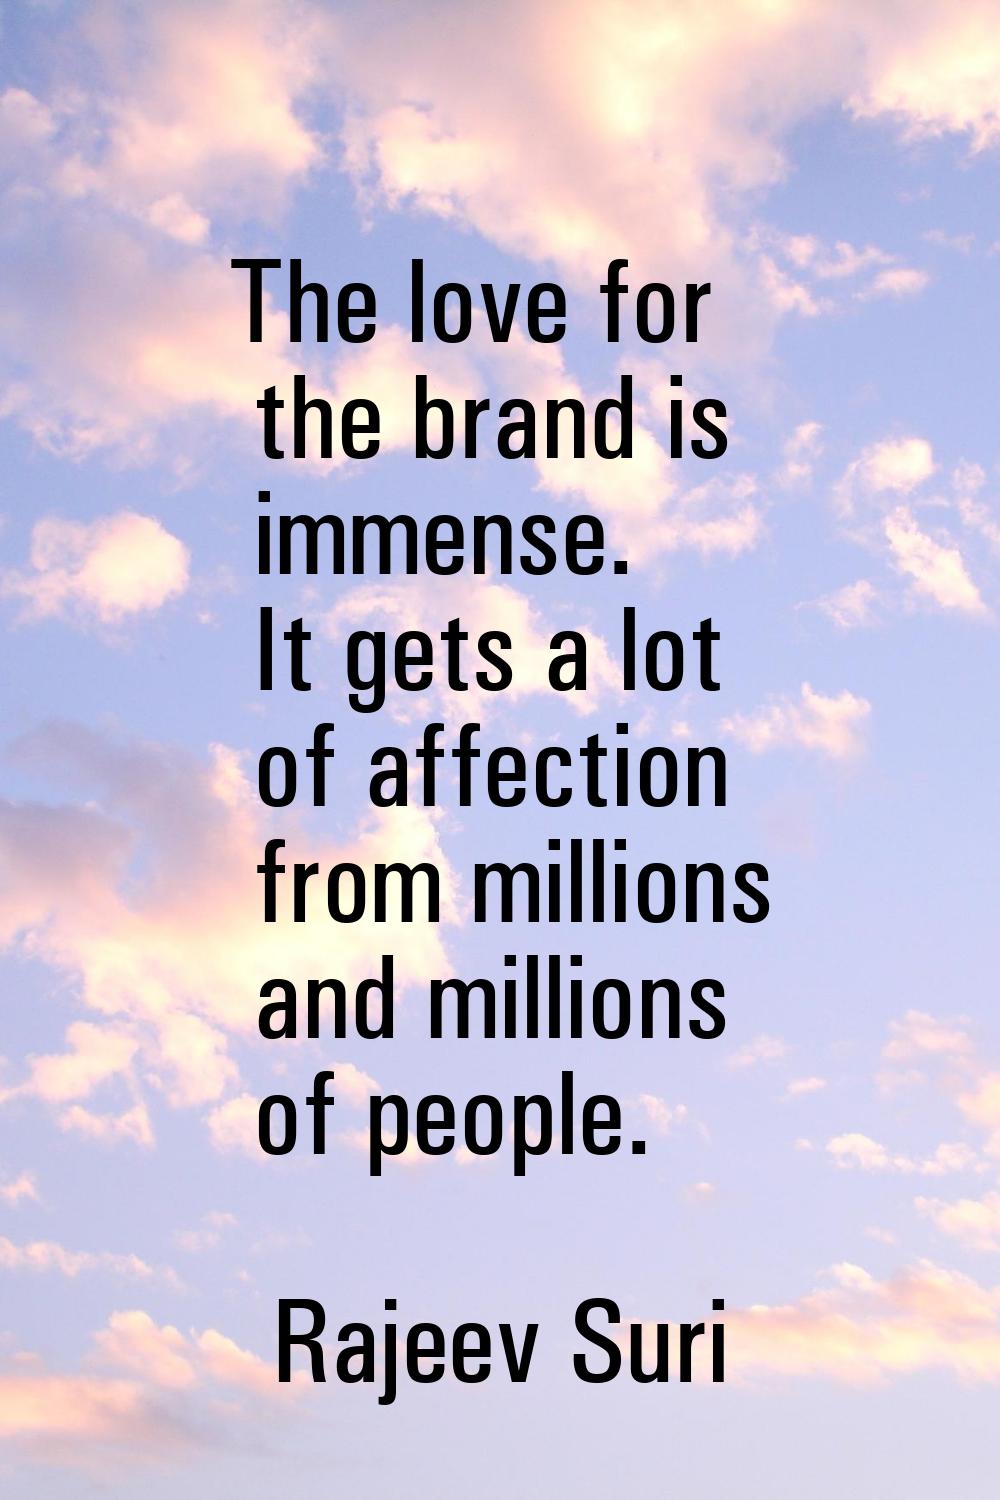 The love for the brand is immense. It gets a lot of affection from millions and millions of people.